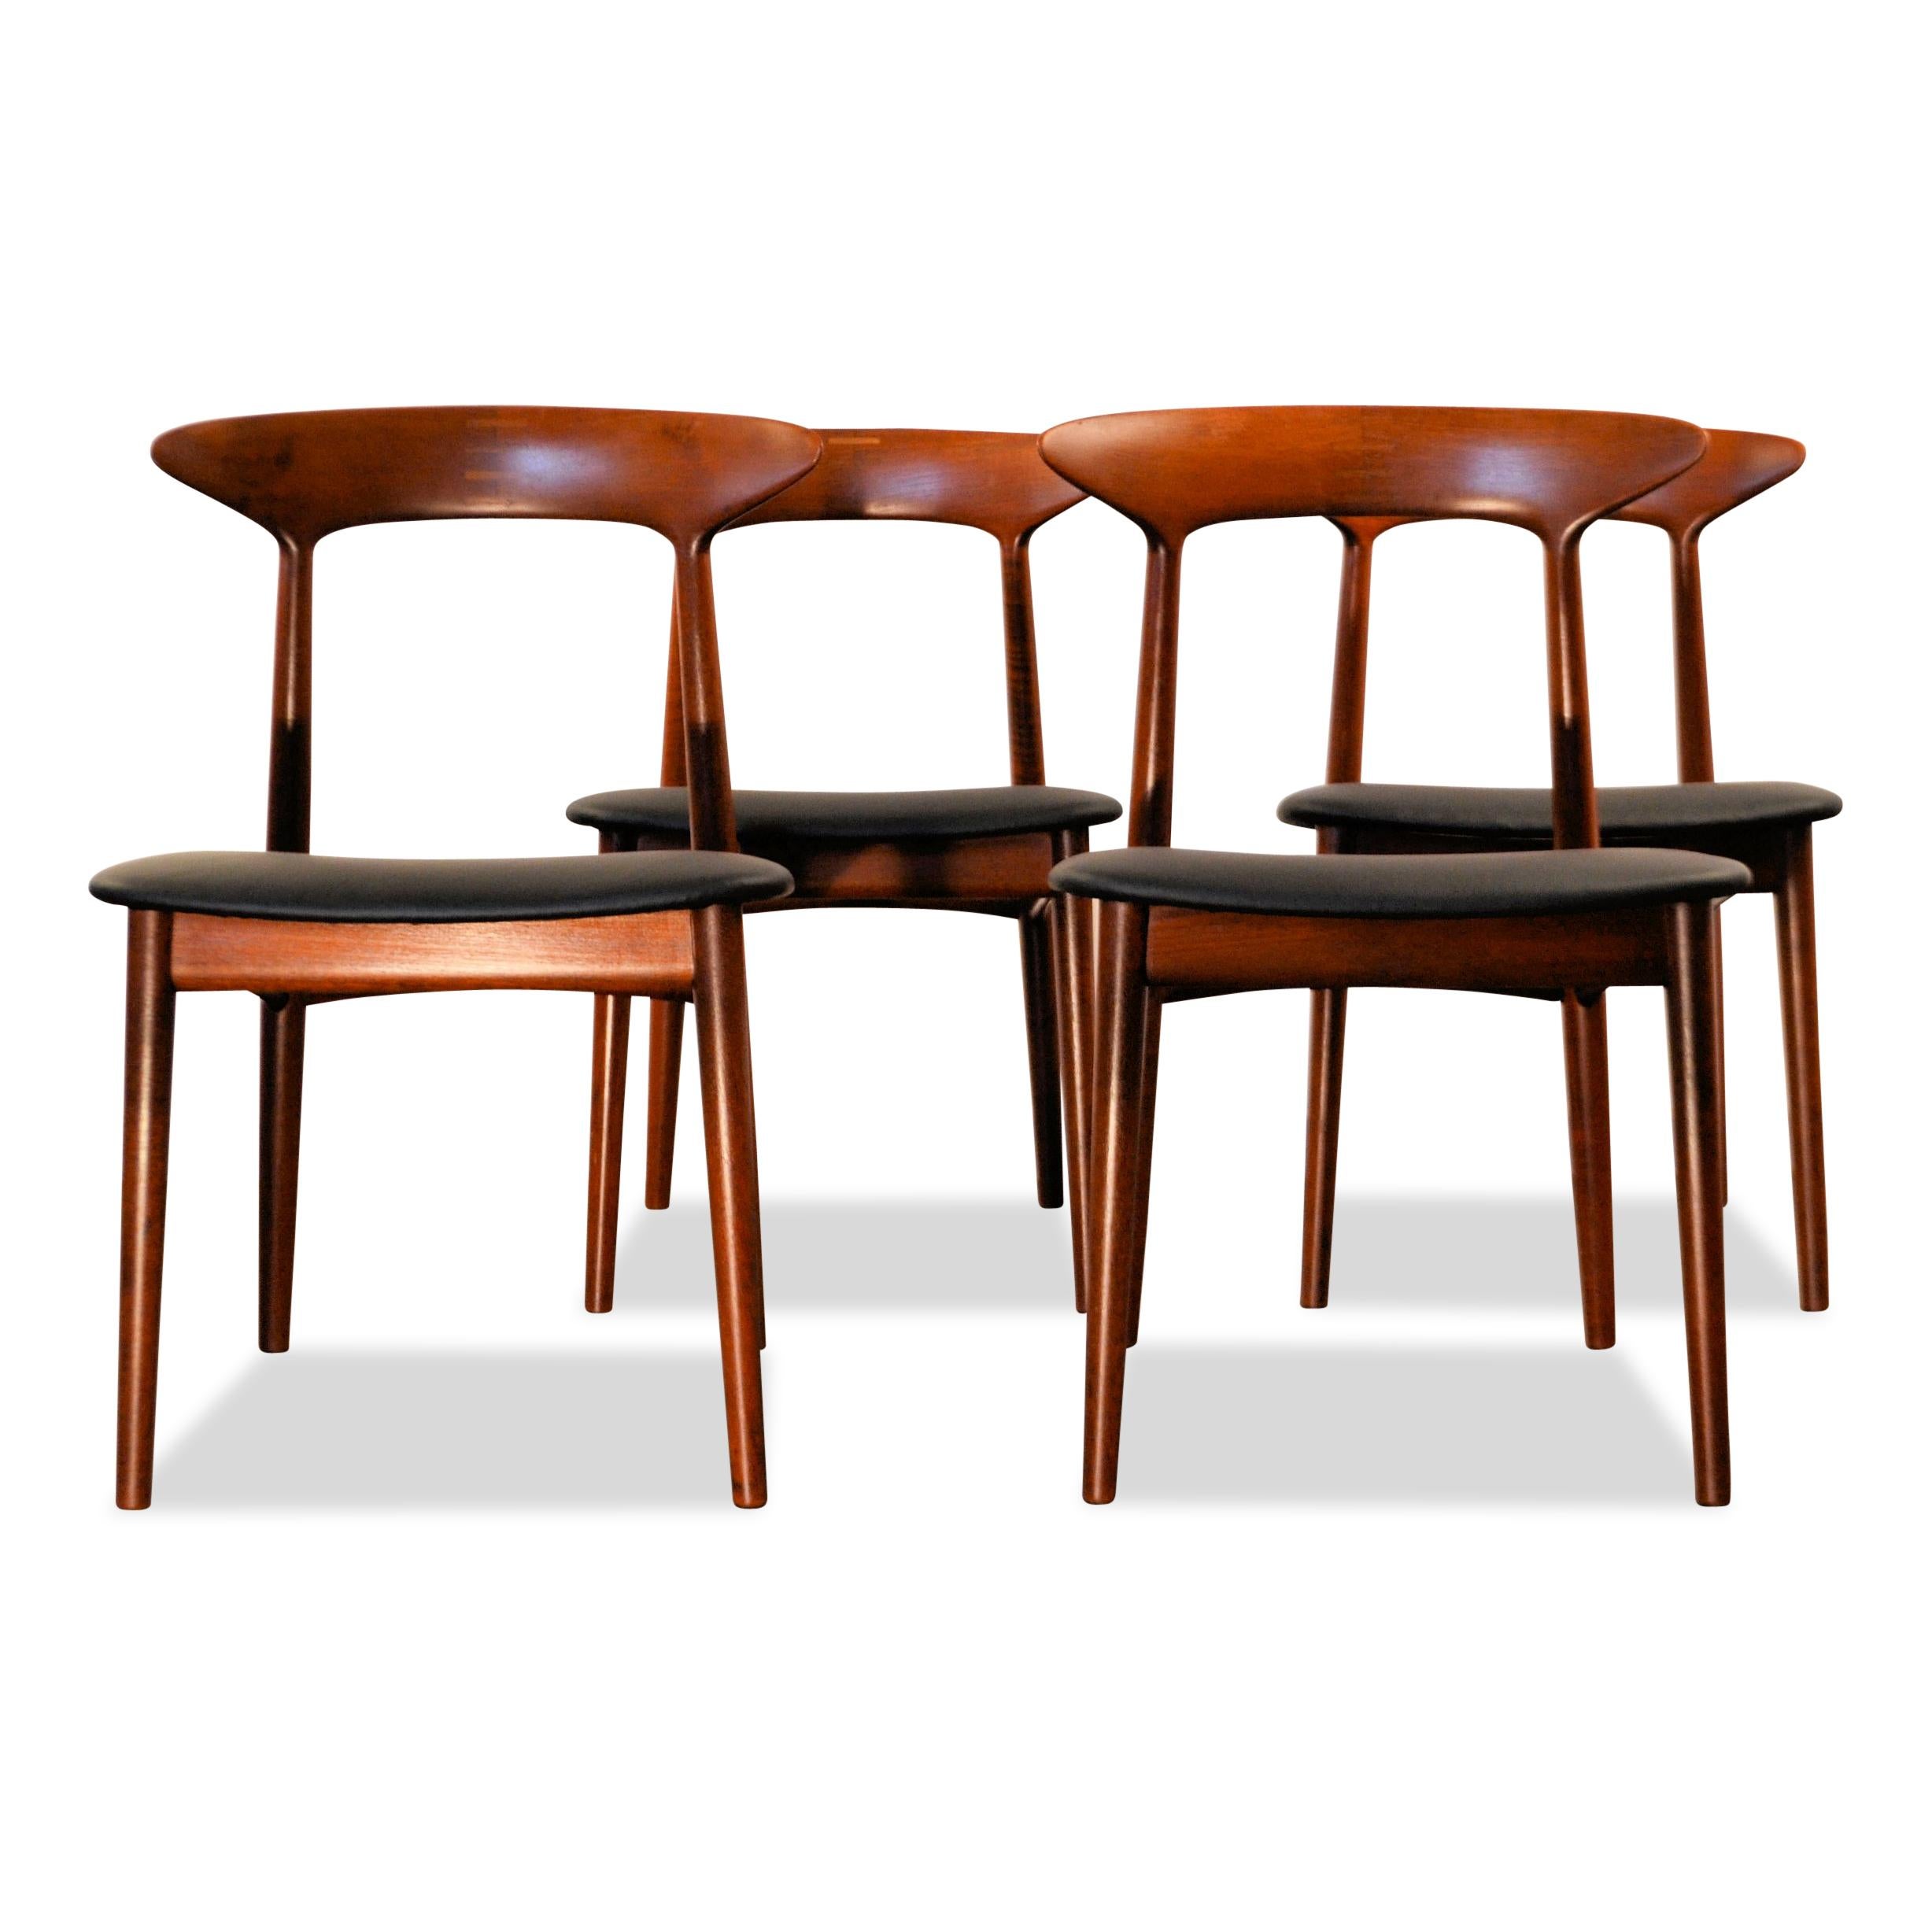 Set of four vintage Danish design dining chairs designed by Kurt Østervig for Danish manufacturer Brande Møbelindustri. The chairs feature solid teak frames with stylish curved backrests, wooden inlays in backrest and legs and leather seats. We’ve